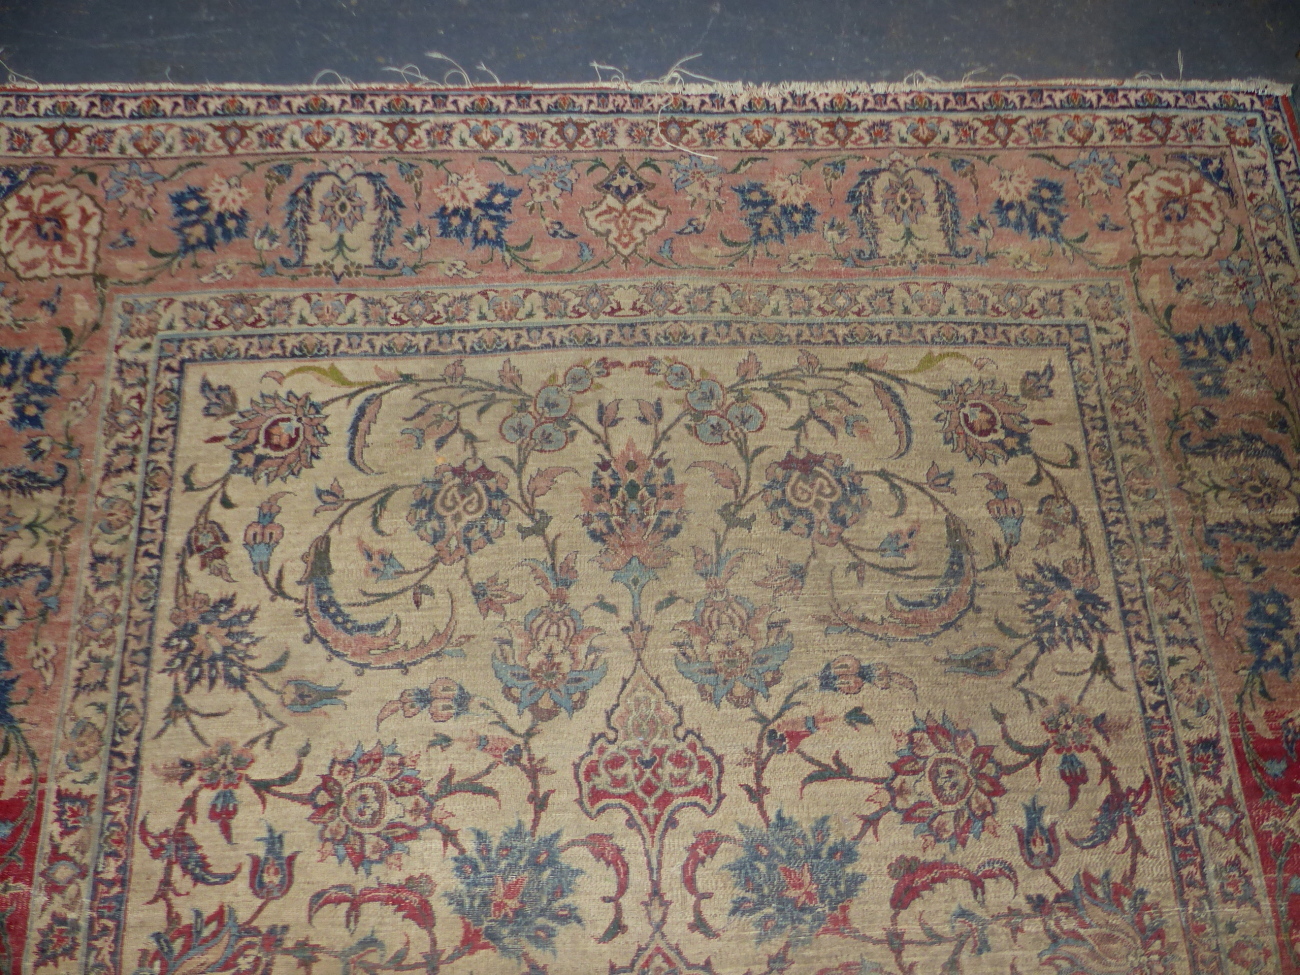 AN ANTIQUE PERSIAN ISFAHAN RUG. 207 x 145cms. - Image 4 of 7